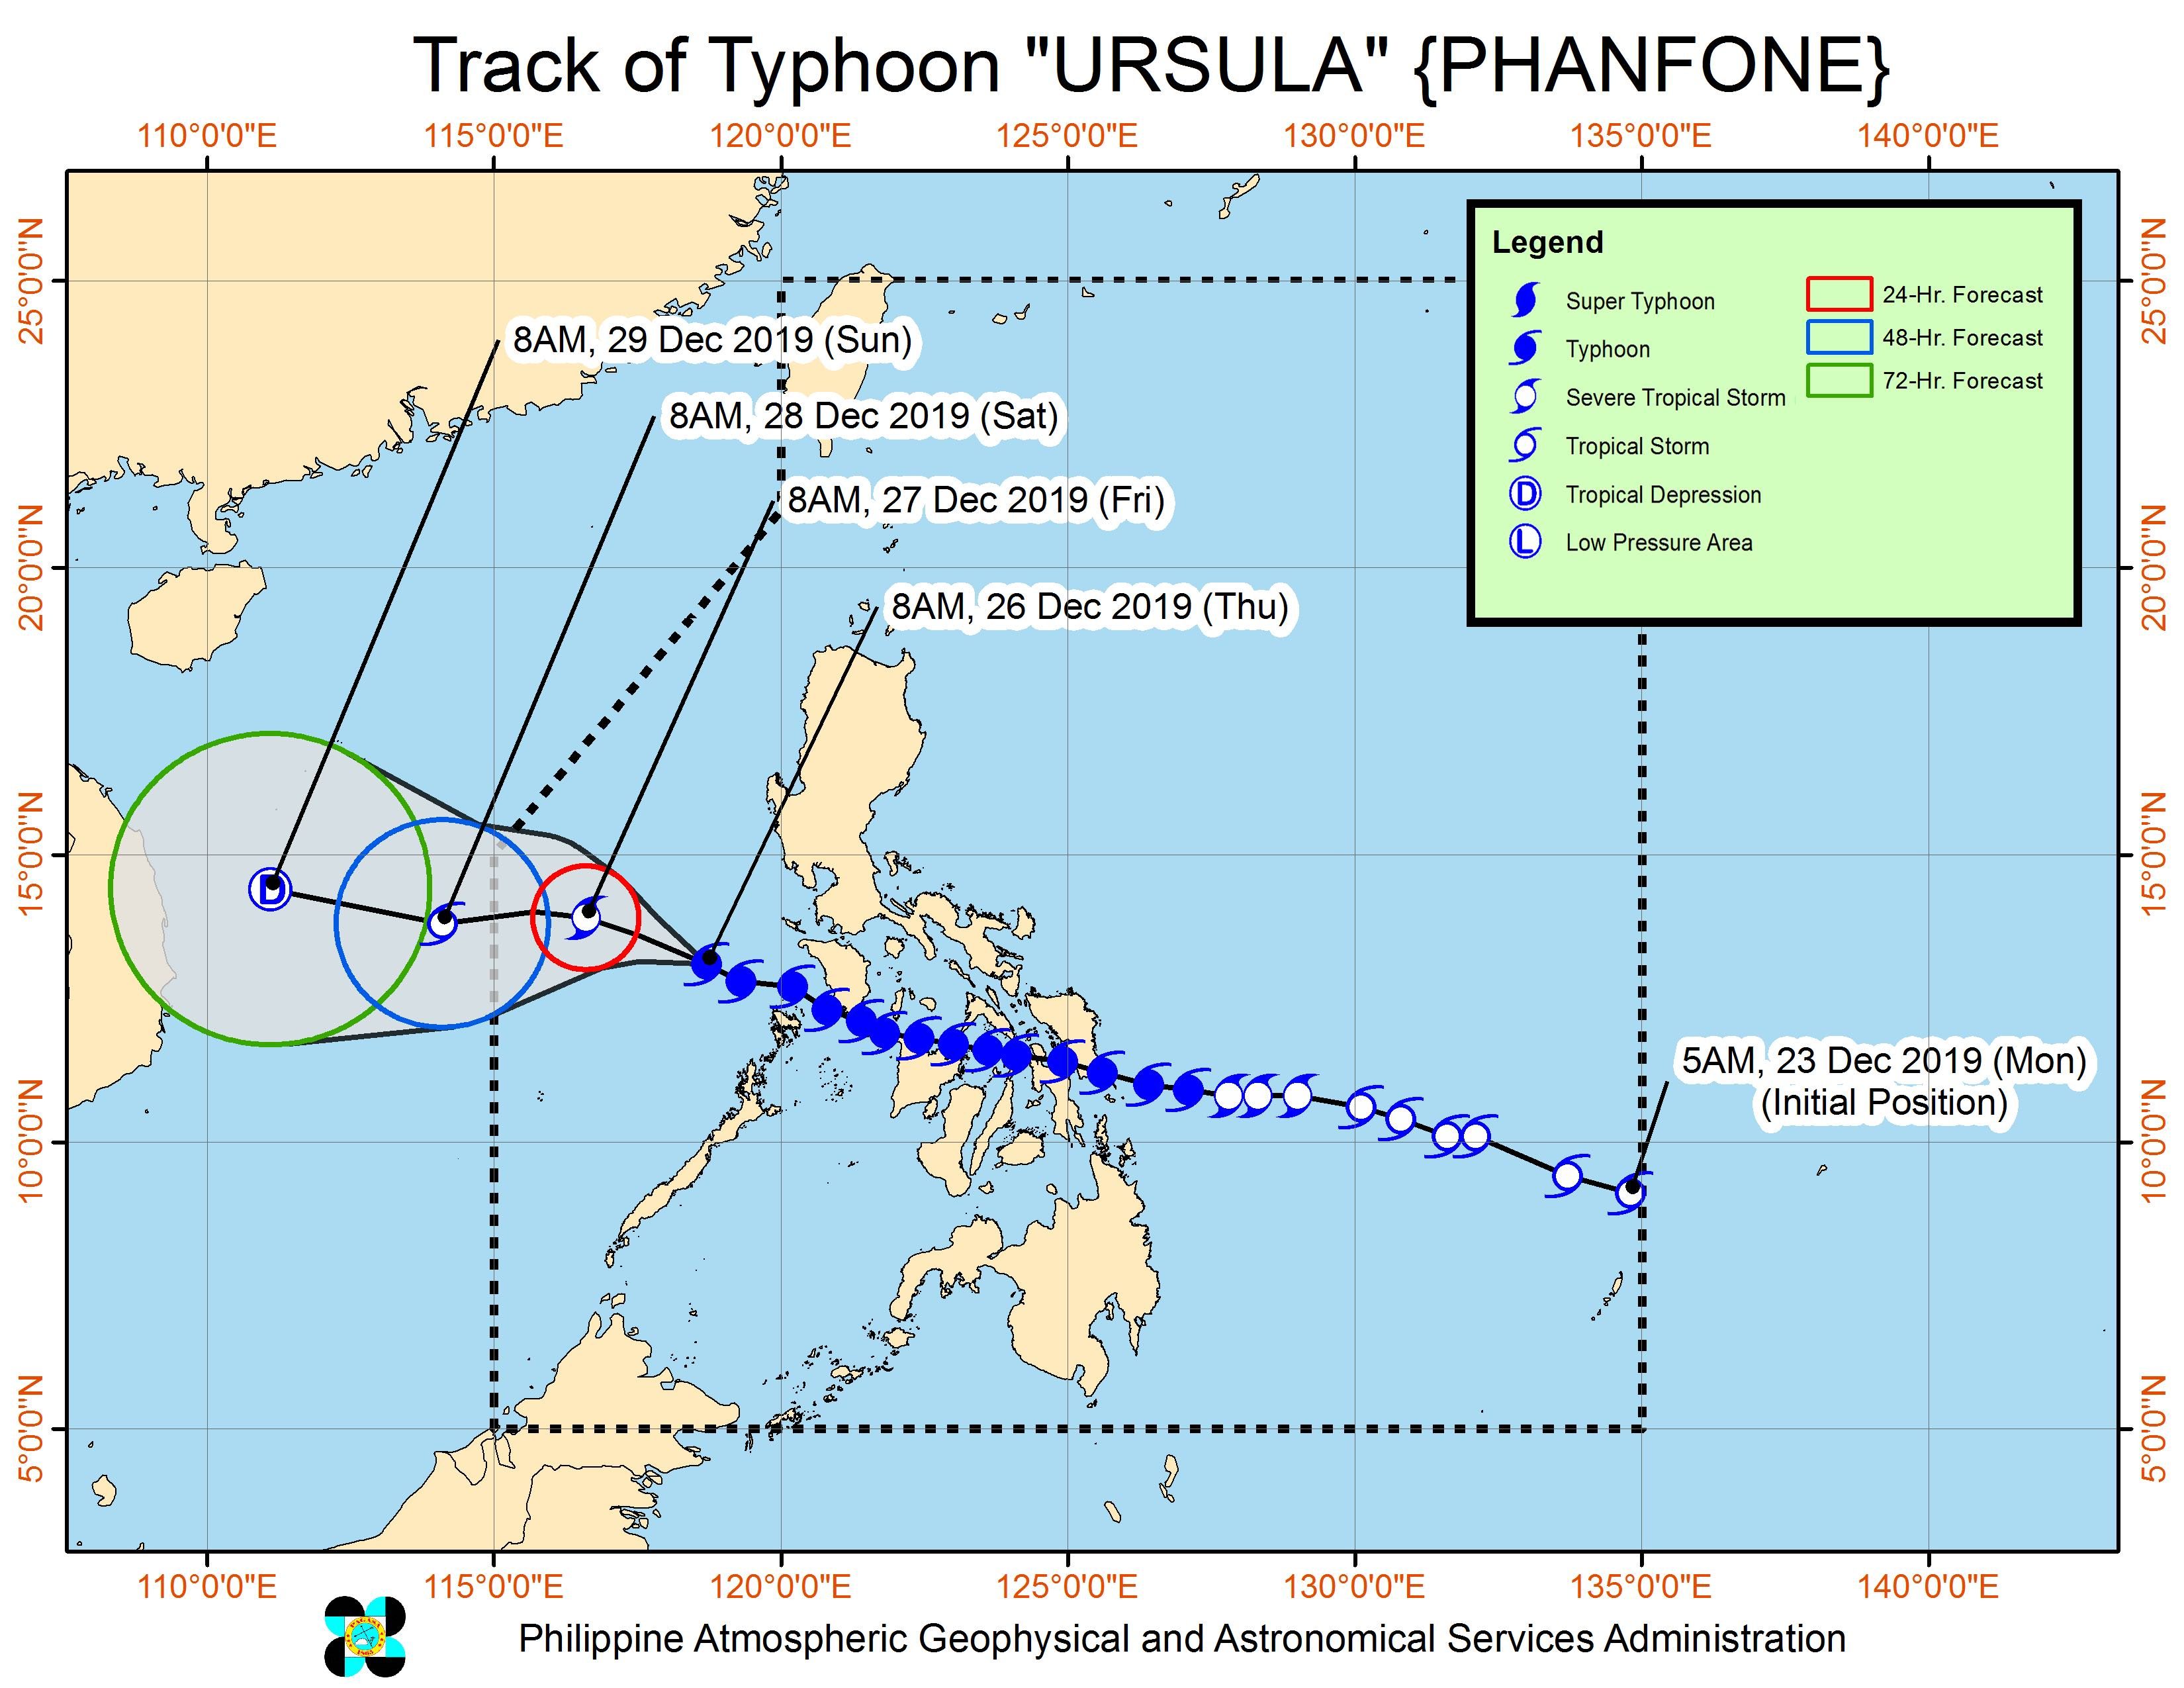 Forecast track of Typhoon Ursula (Phanfone) as of December 26, 2019, 11 am. Image from PAGASA 